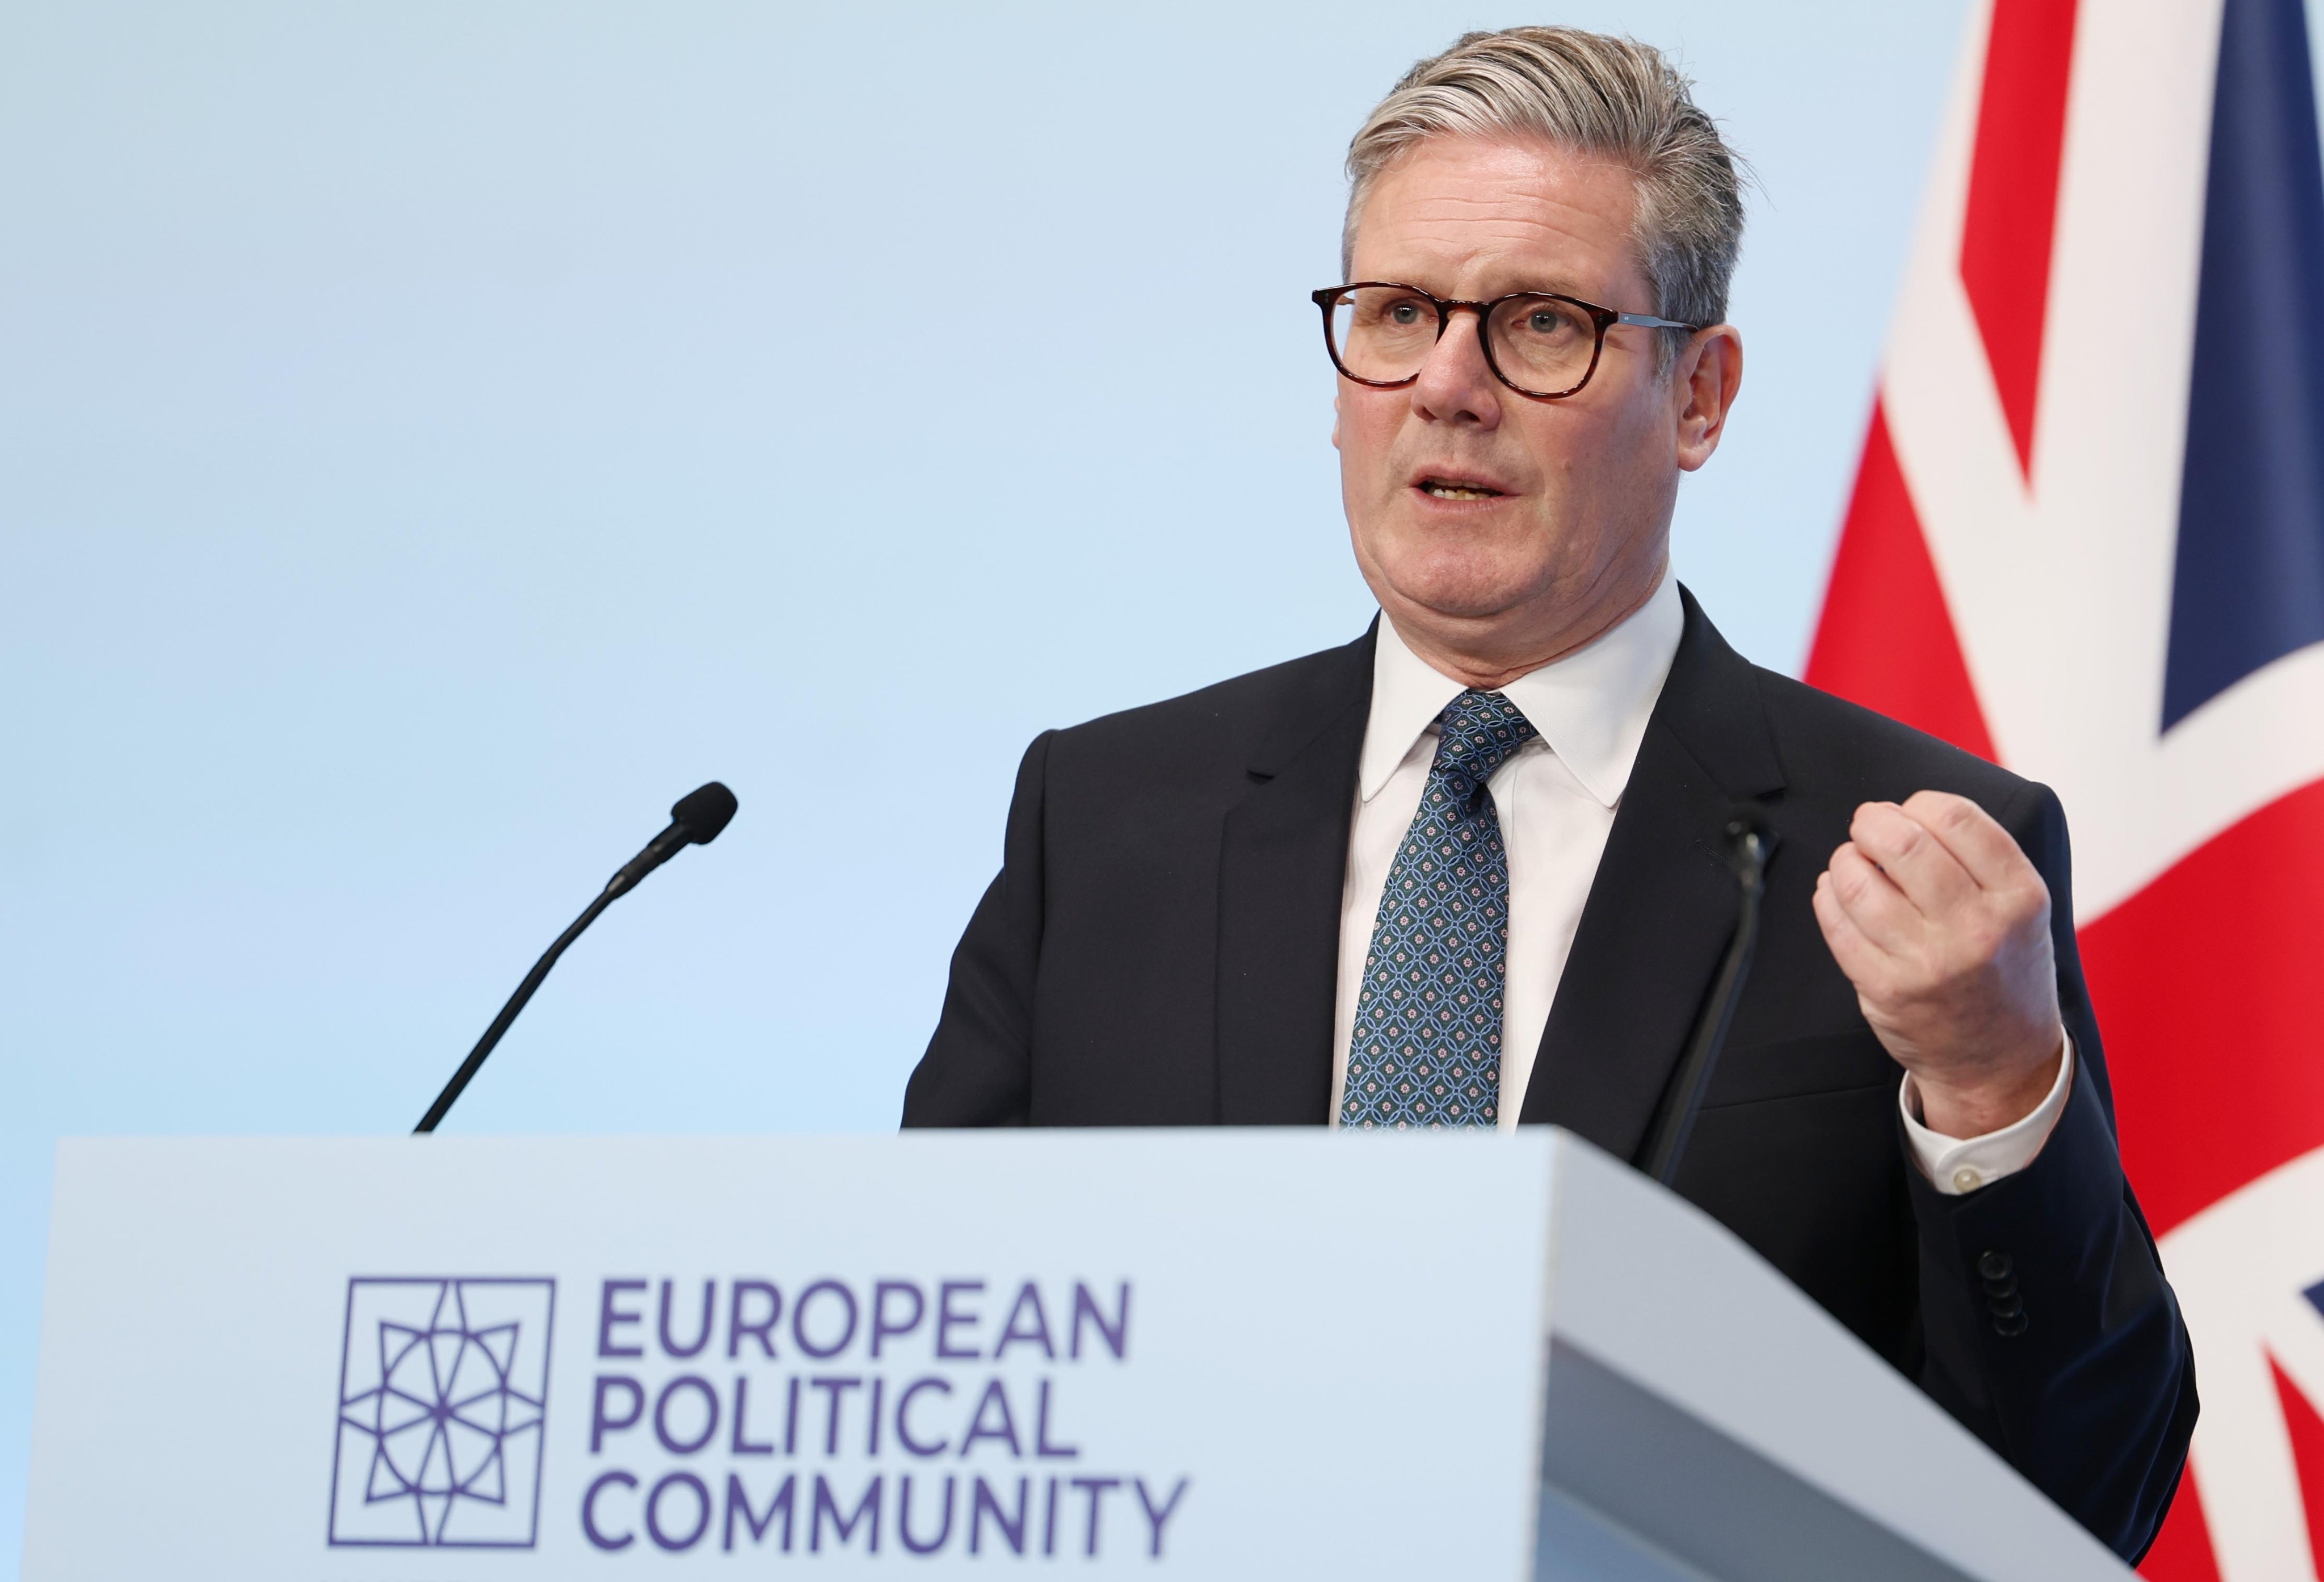 British Prime Minister Keir Starmer attends a press conference at the European Political Community (EPC) summit at Blenheim Palace, Woodstock, on Thursday. Photo: EPA-EFE